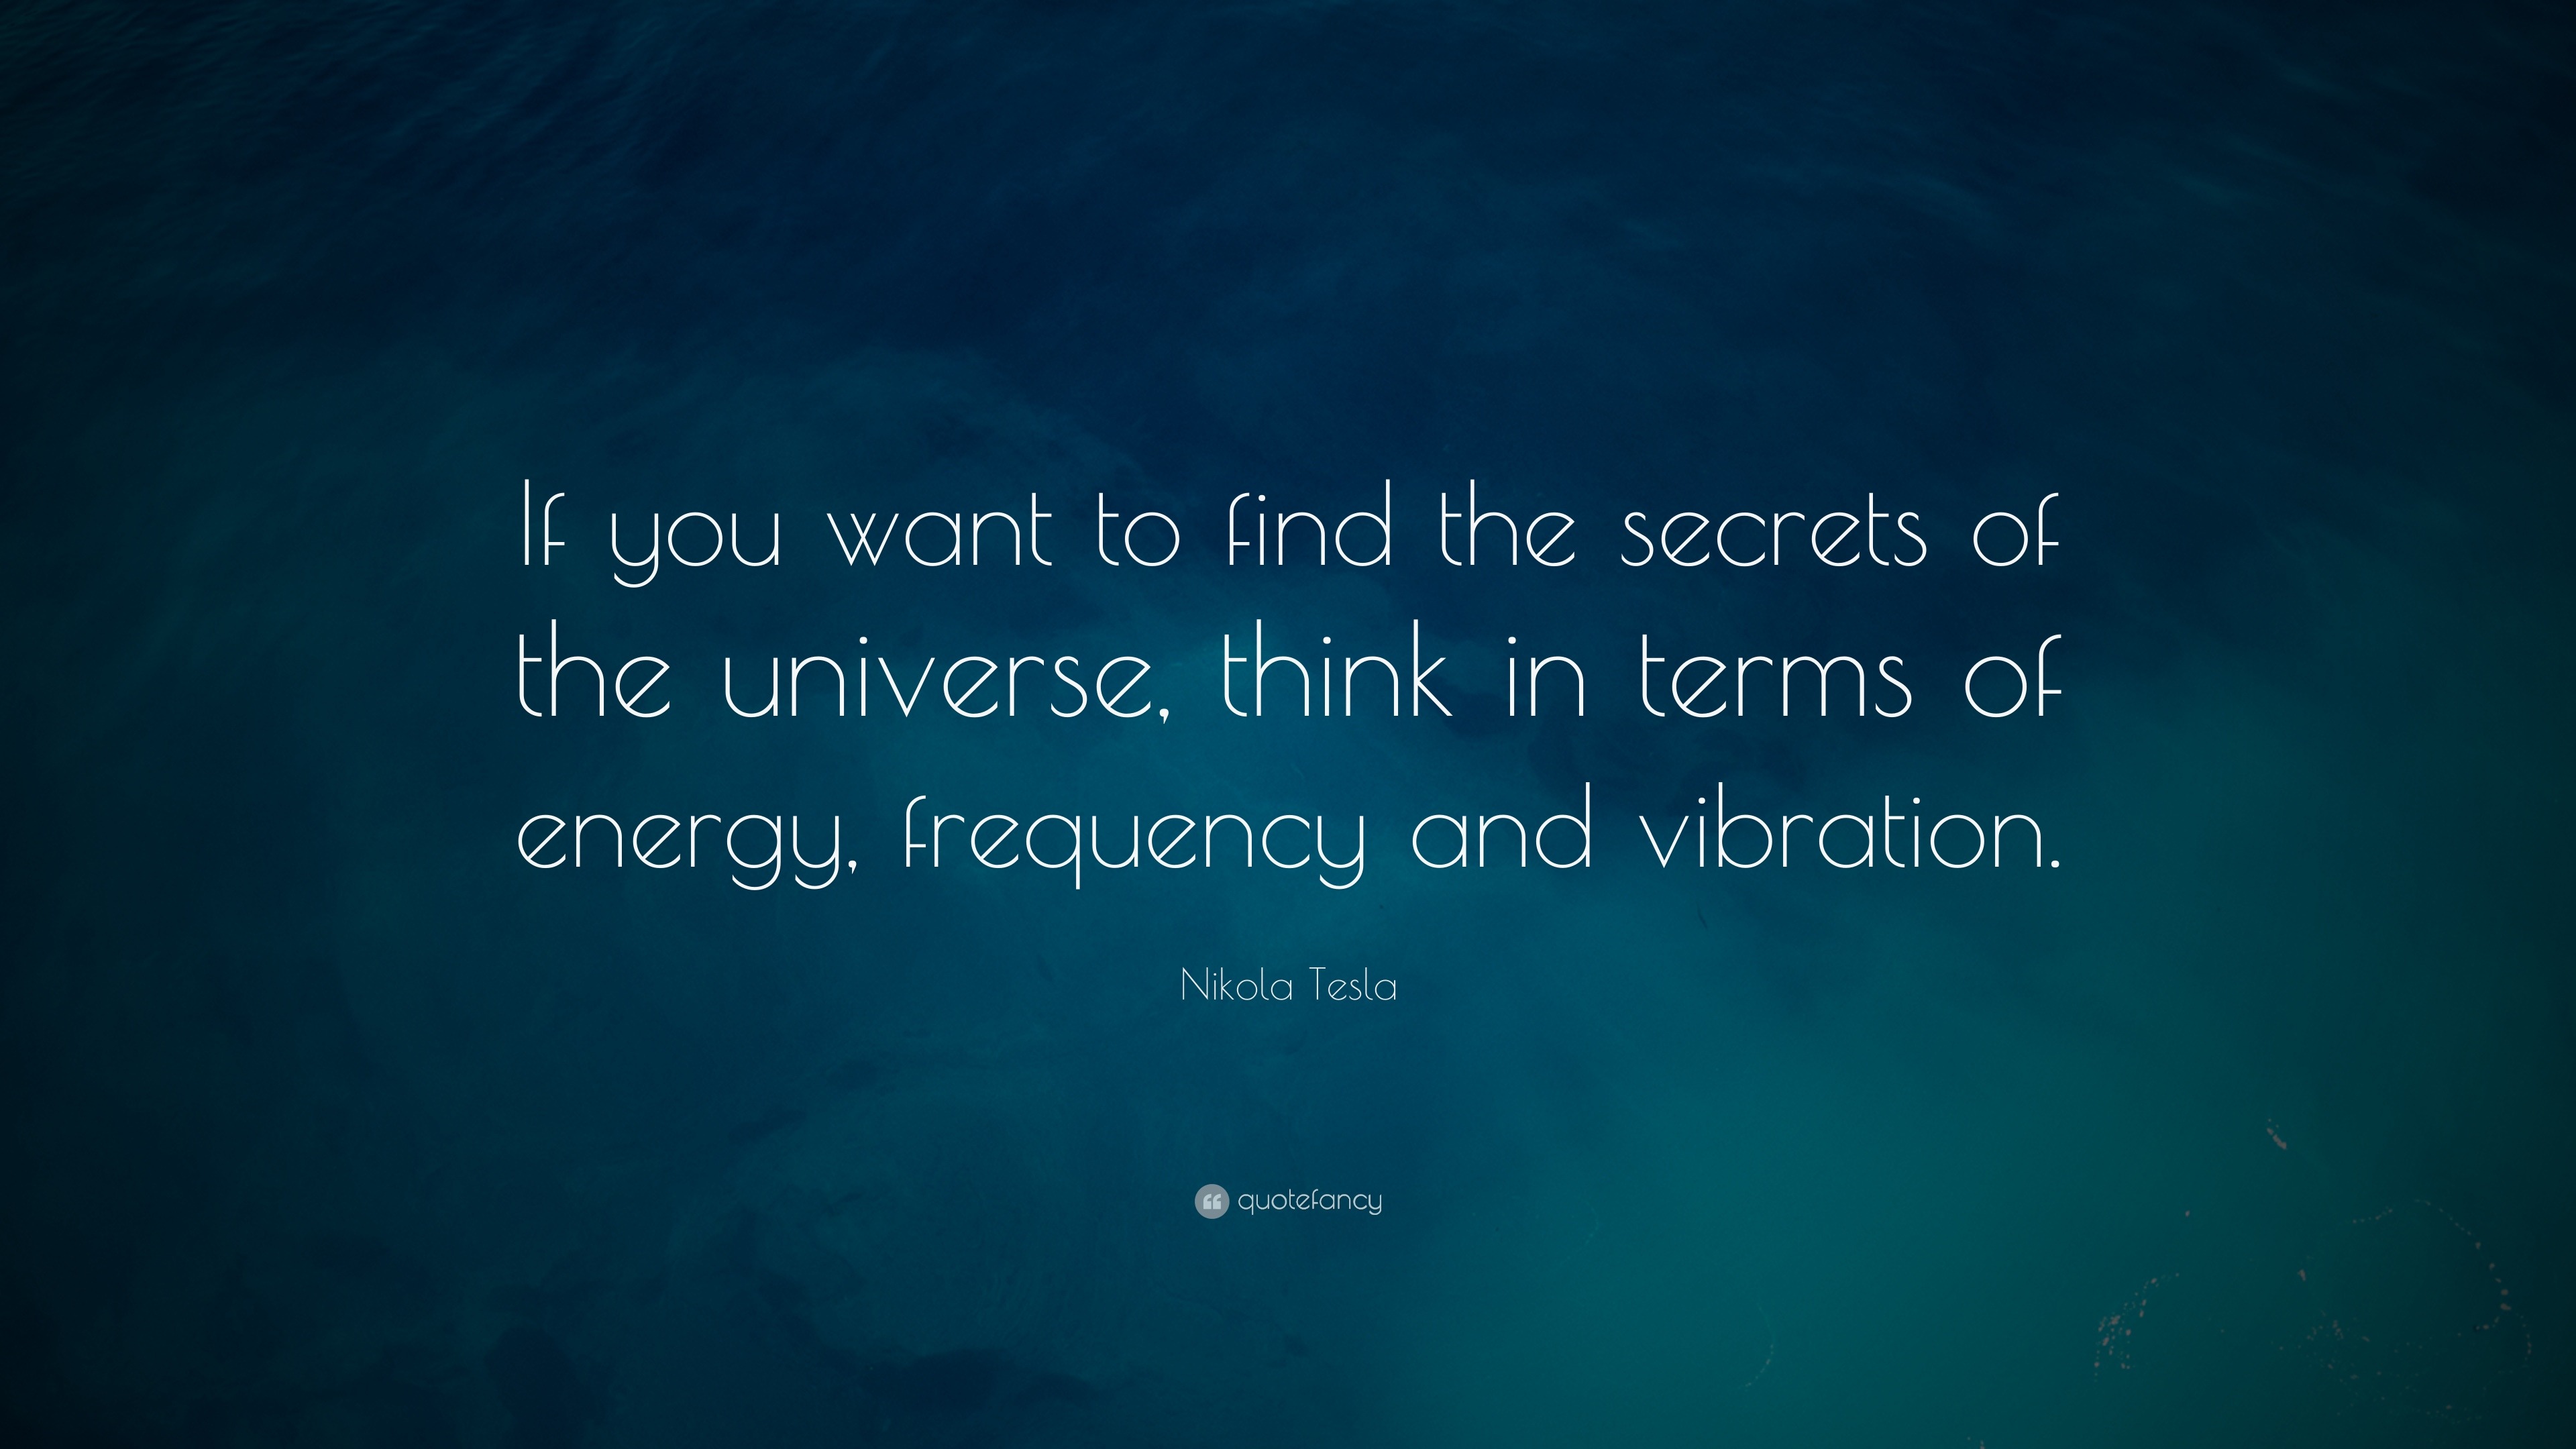 Nikola Tesla Quote “If you want to find the secrets of